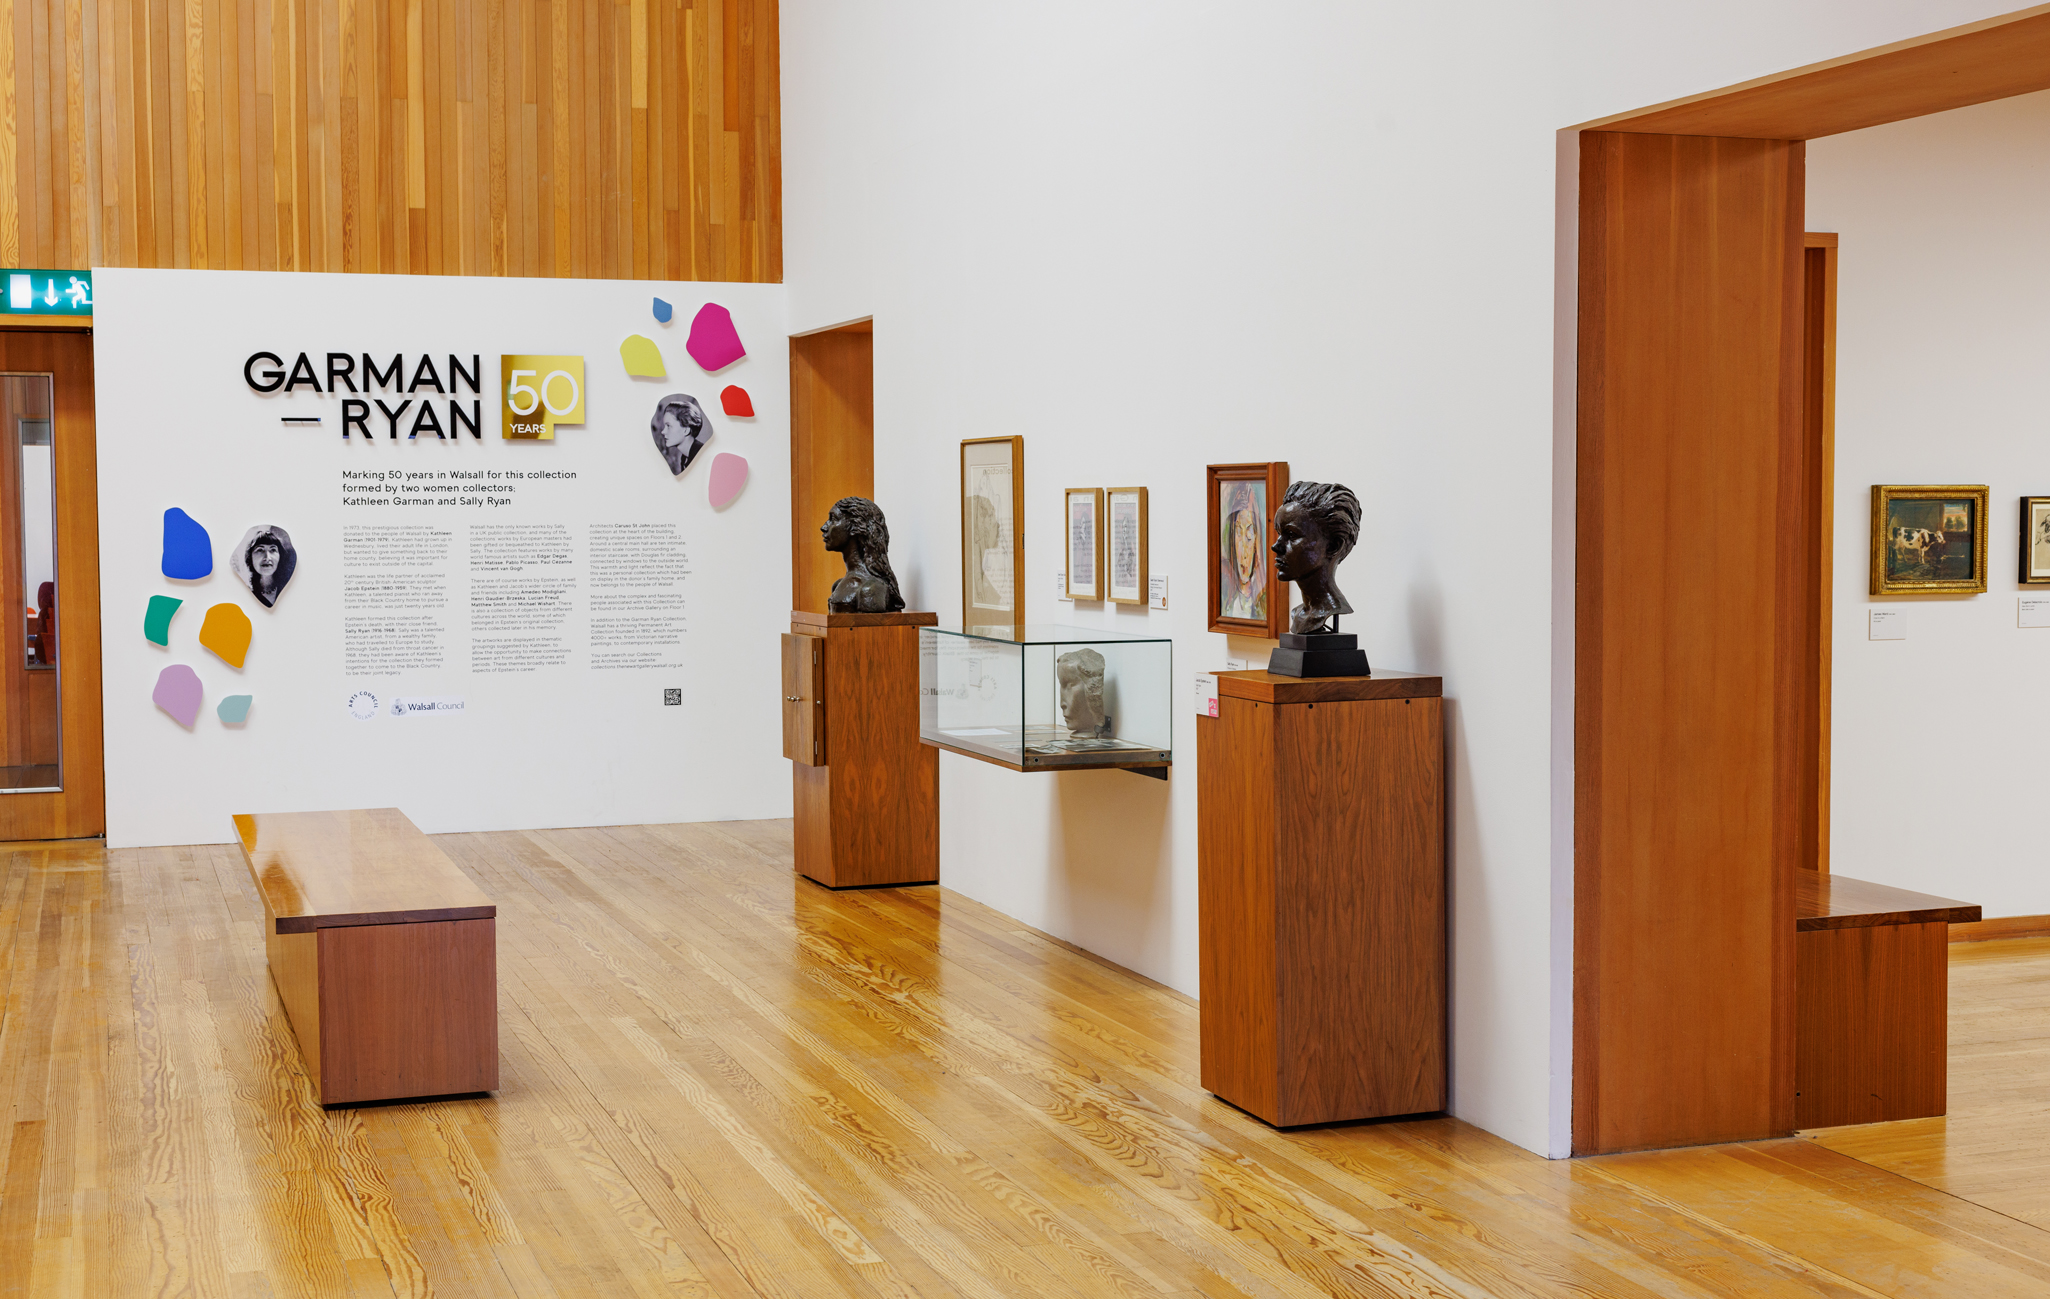 An view of The New Art Gallery Walsall's Garman Ryan Collection featuring sculptures of the co-founders Kathleen Garman and Sally Ryan as well as other wall-based artworks.